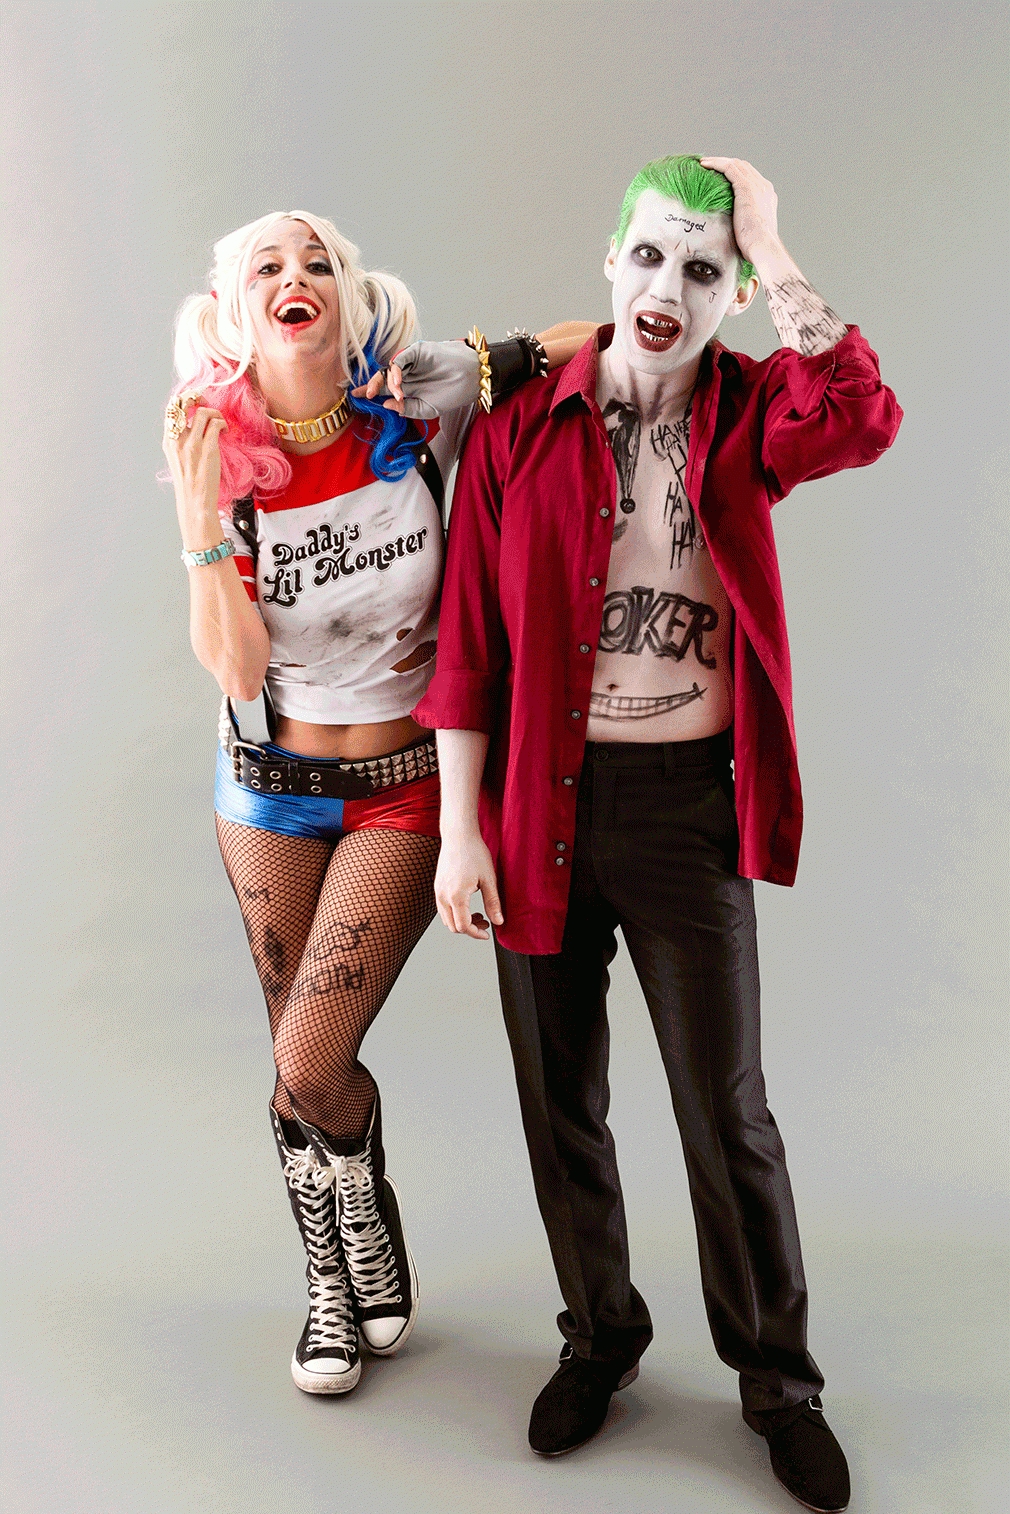 10 Most Popular His And Her Halloween Costume Ideas save this diy suicide squad couples halloween costume idea to become 4 2022